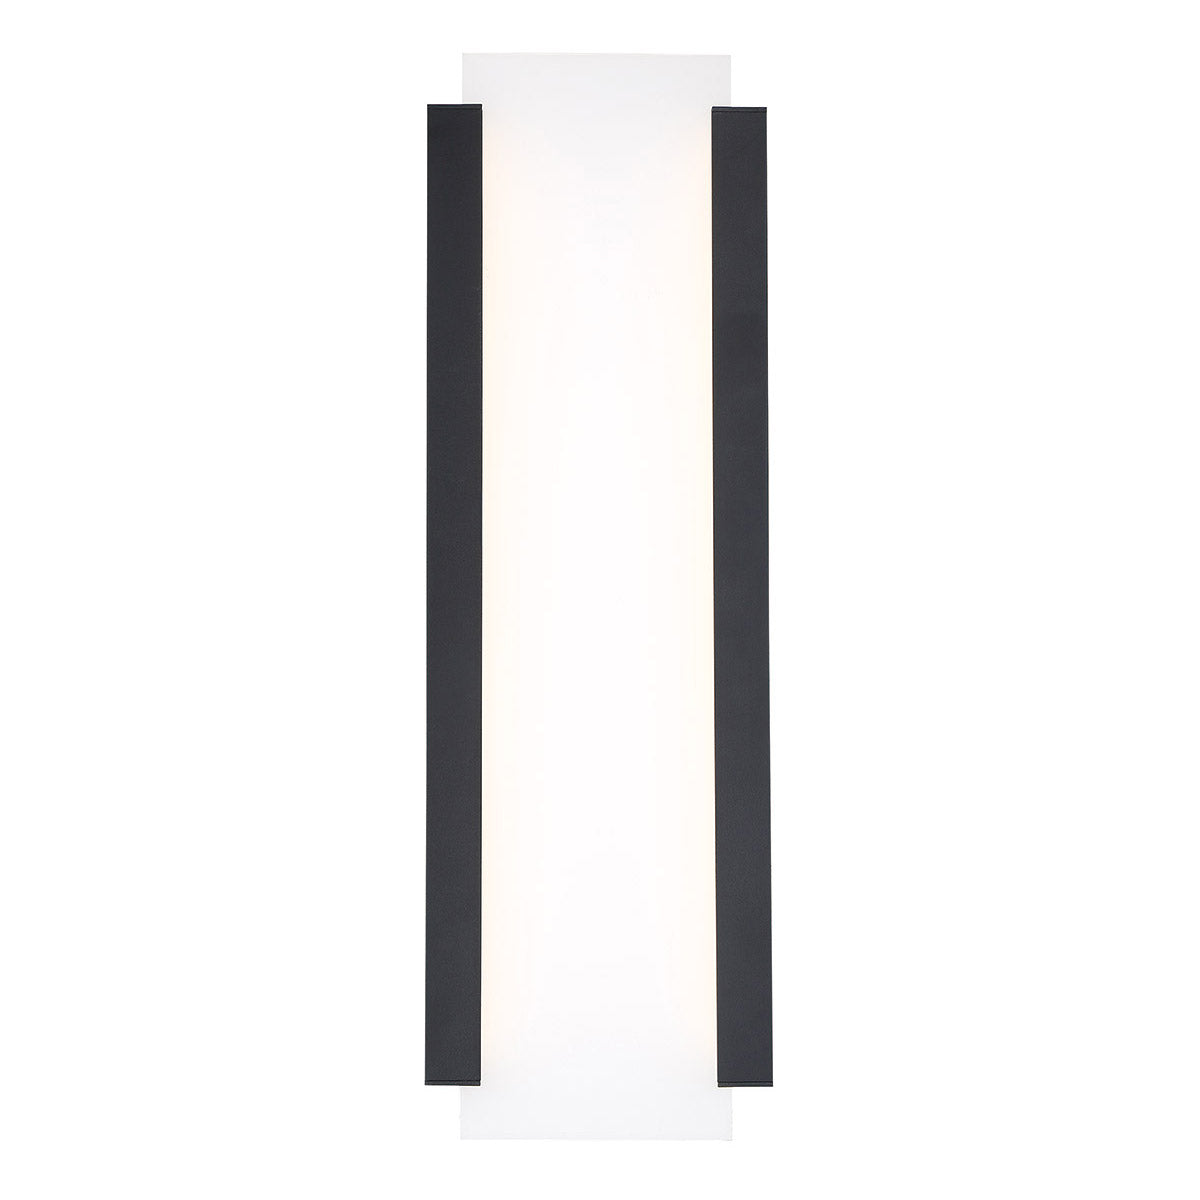 Fiction LED 20 inch Black Outdoor Wall Light in 20in, dweLED KB2430-A4-B3-P1